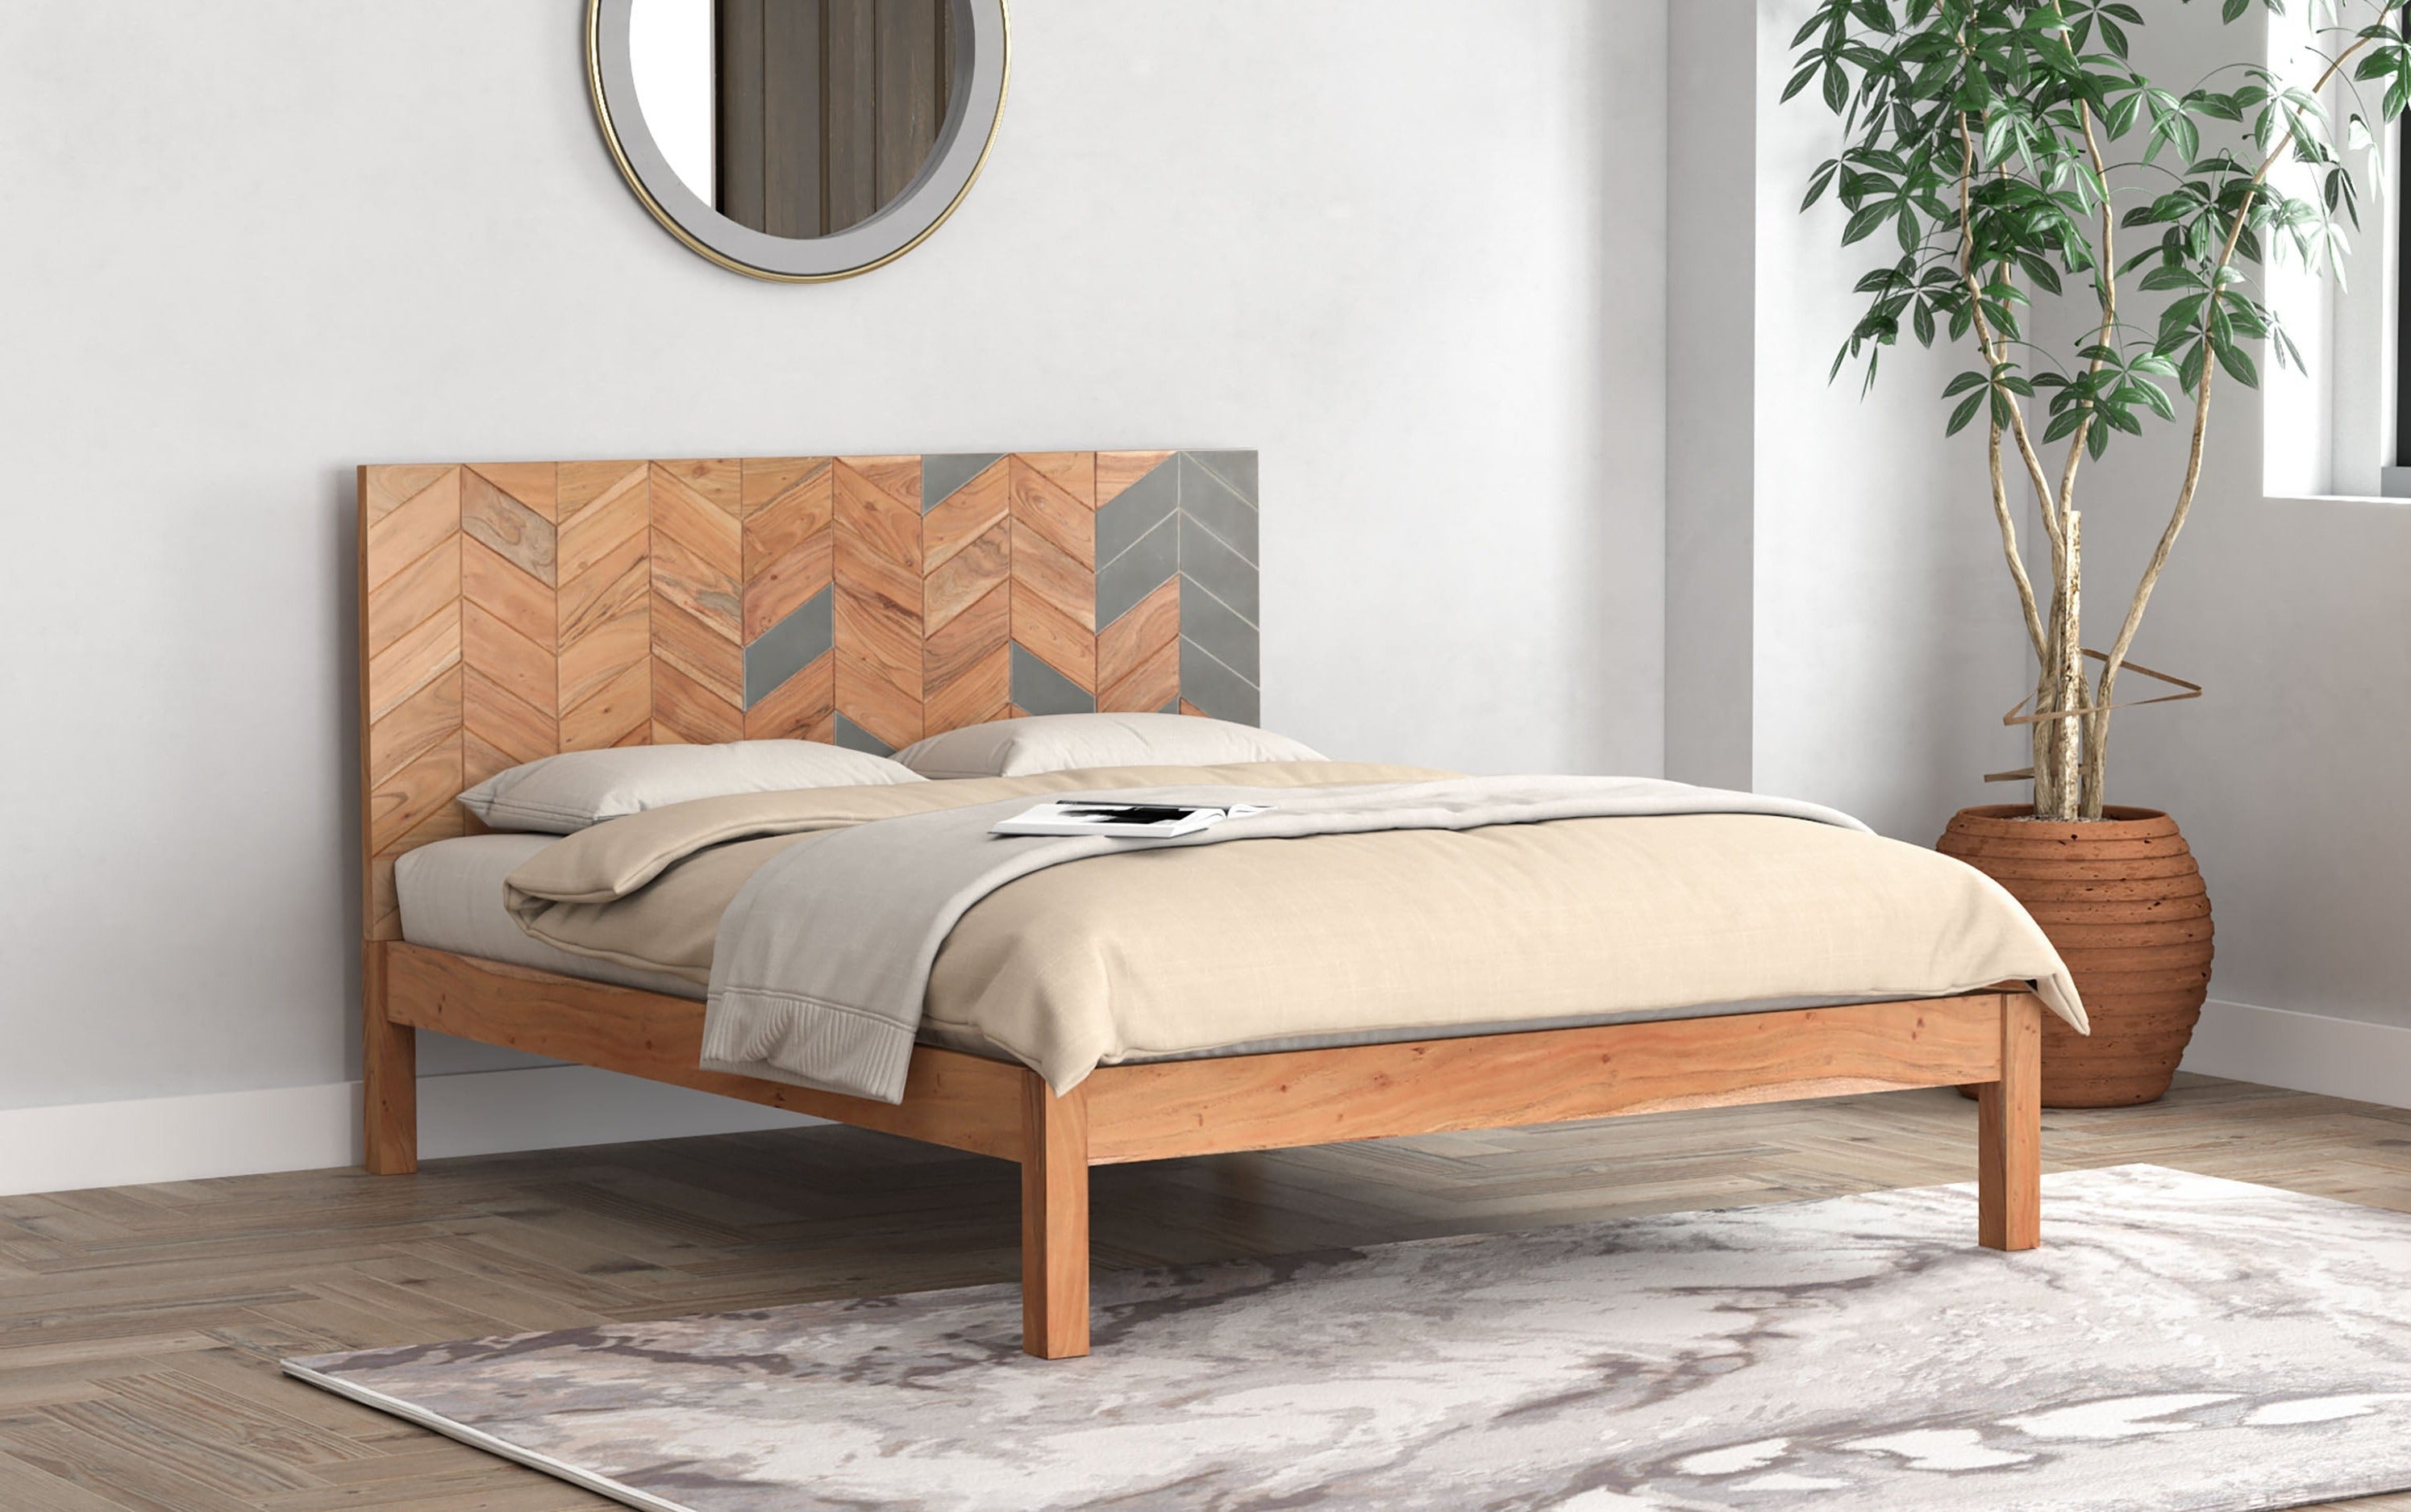 Bold geometric wooden headboard featuring color block elements, creating a playful yet sophisticated focal point in the bedroom.